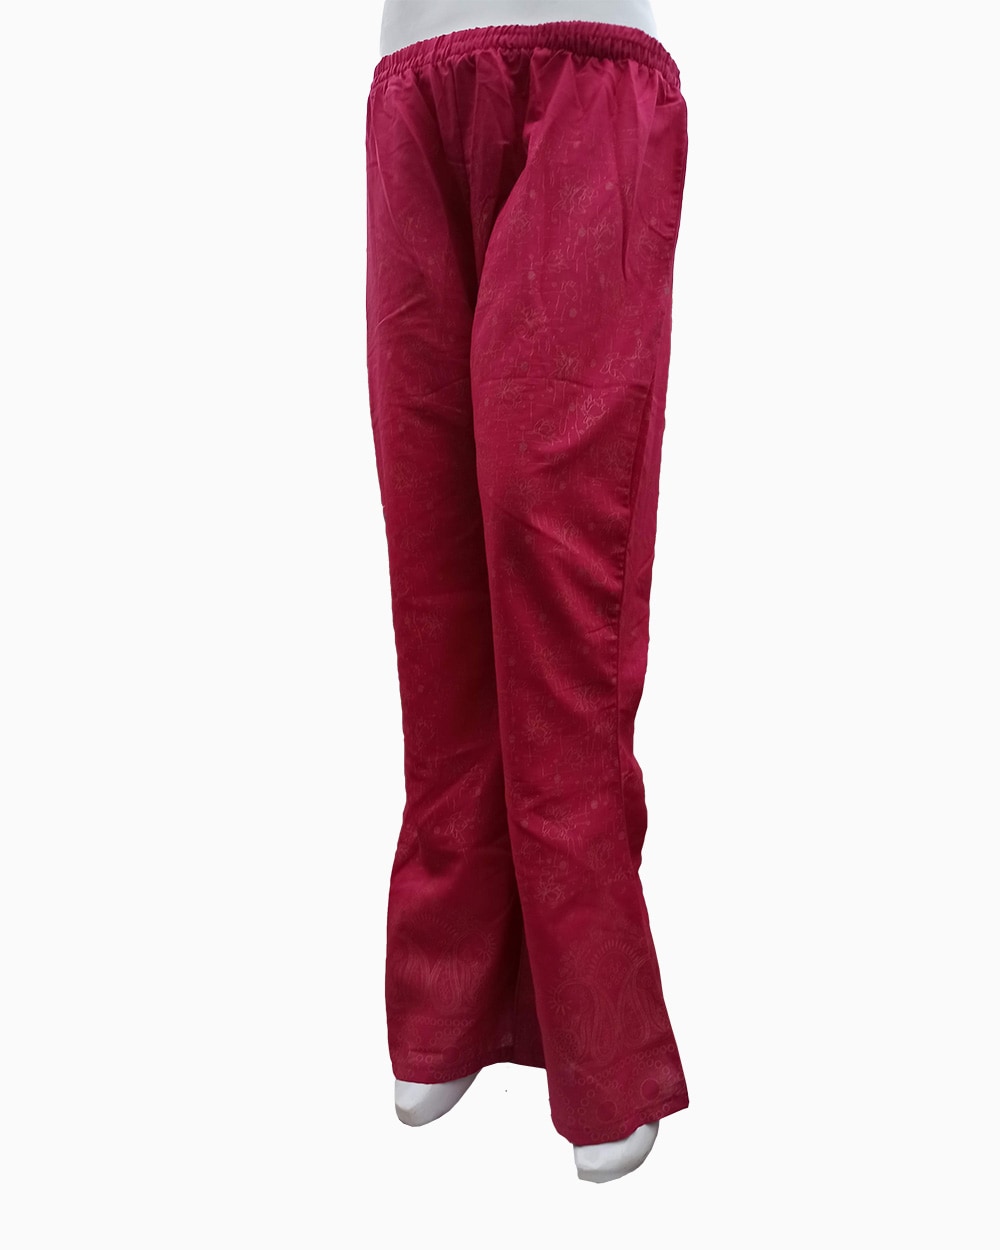 linen printed flapper trouser designs (13)-maroon red printed female trouser